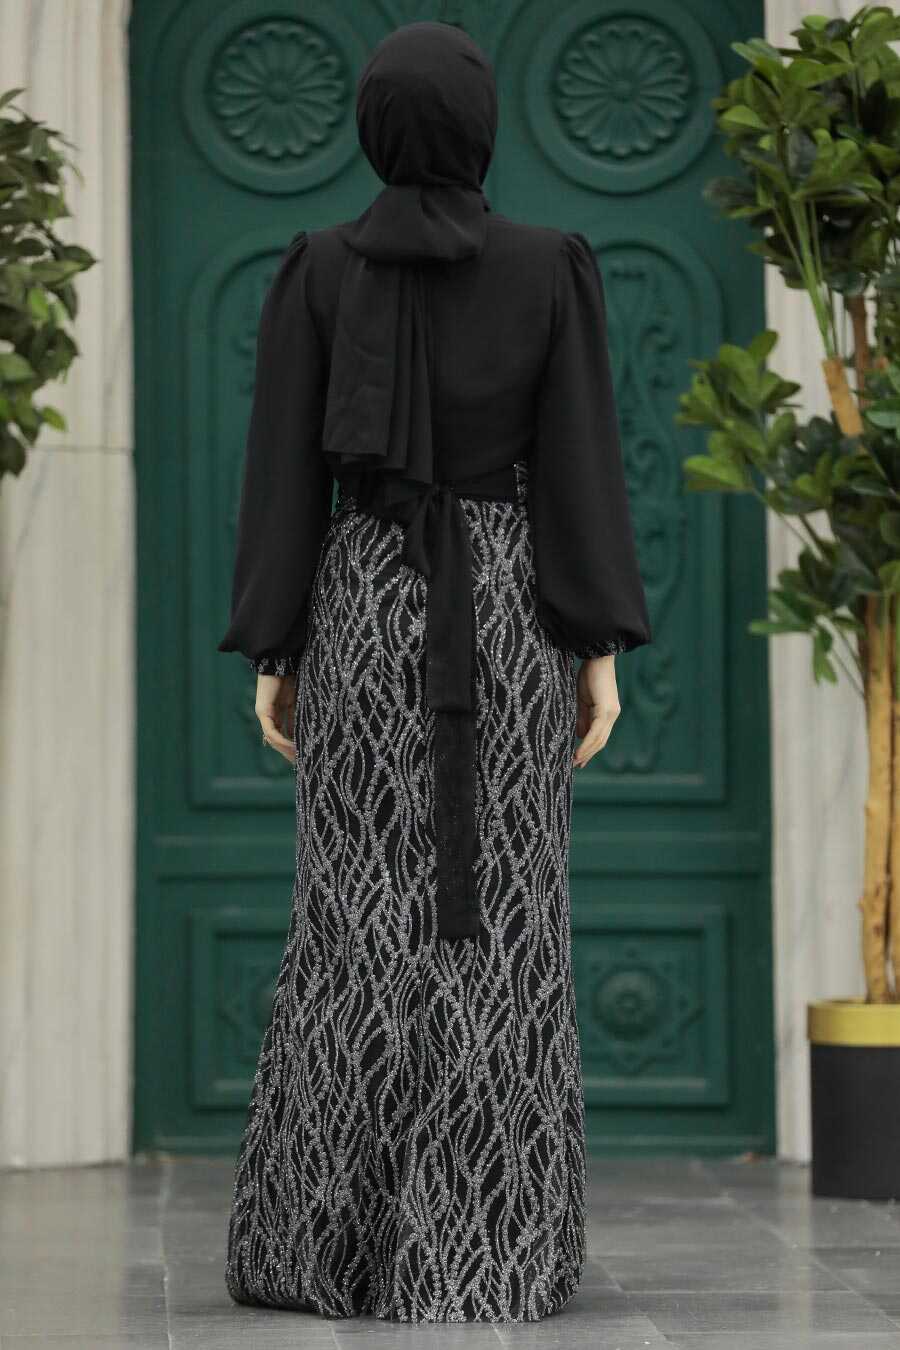  Luxury Black Islamic Clothing Evening Gown 22213S